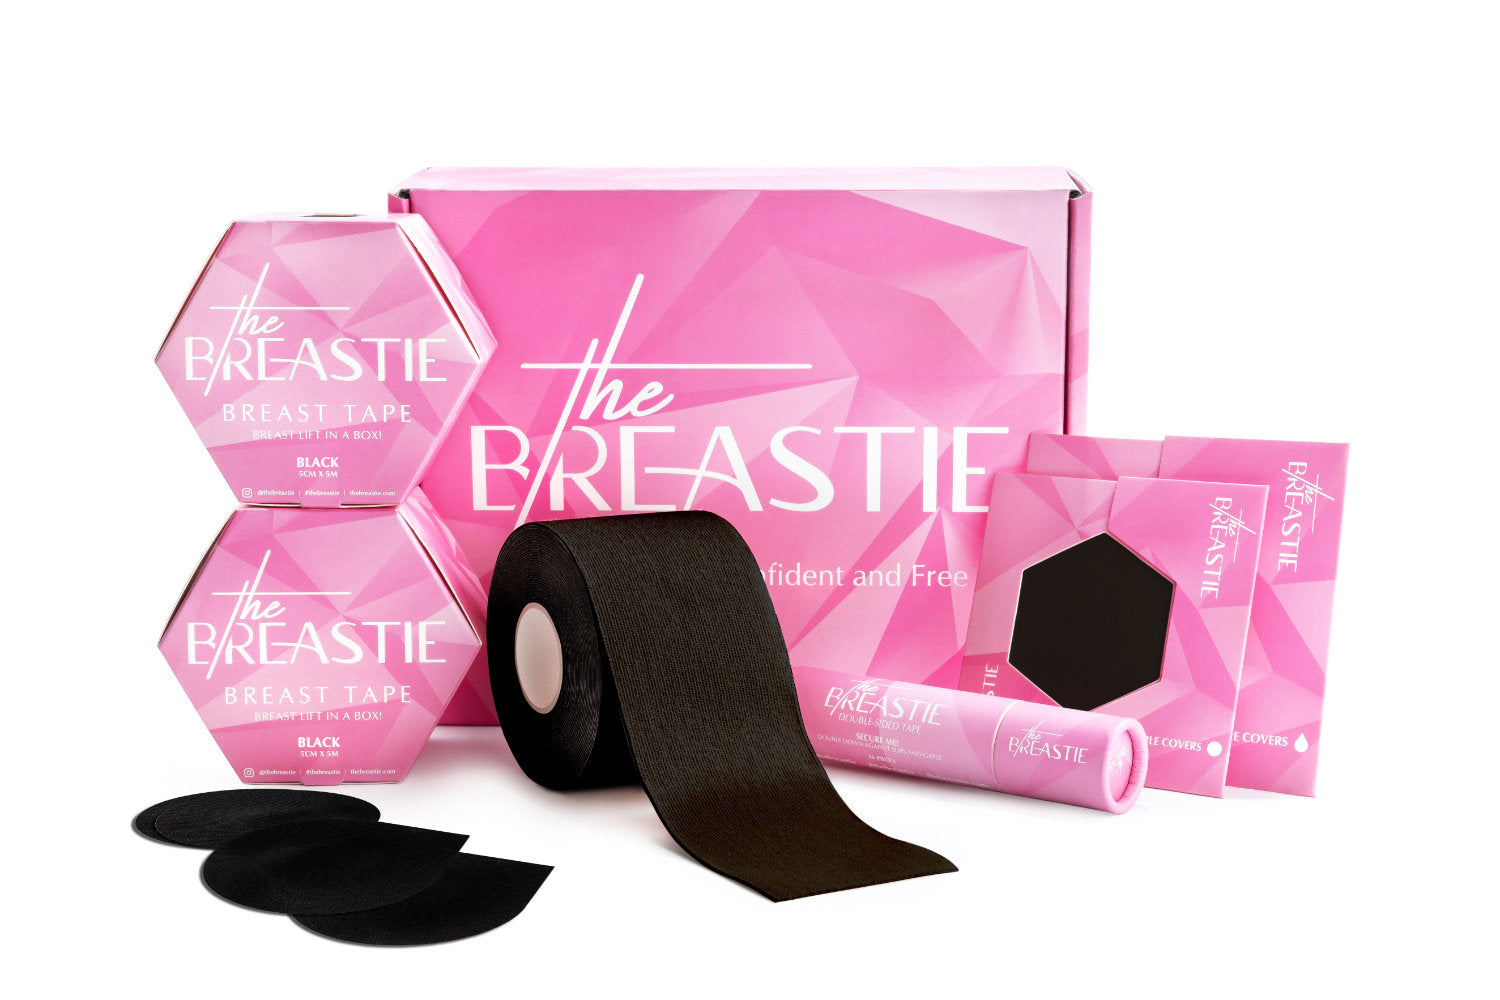 The Breastie Bundle (Black) - Feel Beautiful, Confident and Free!